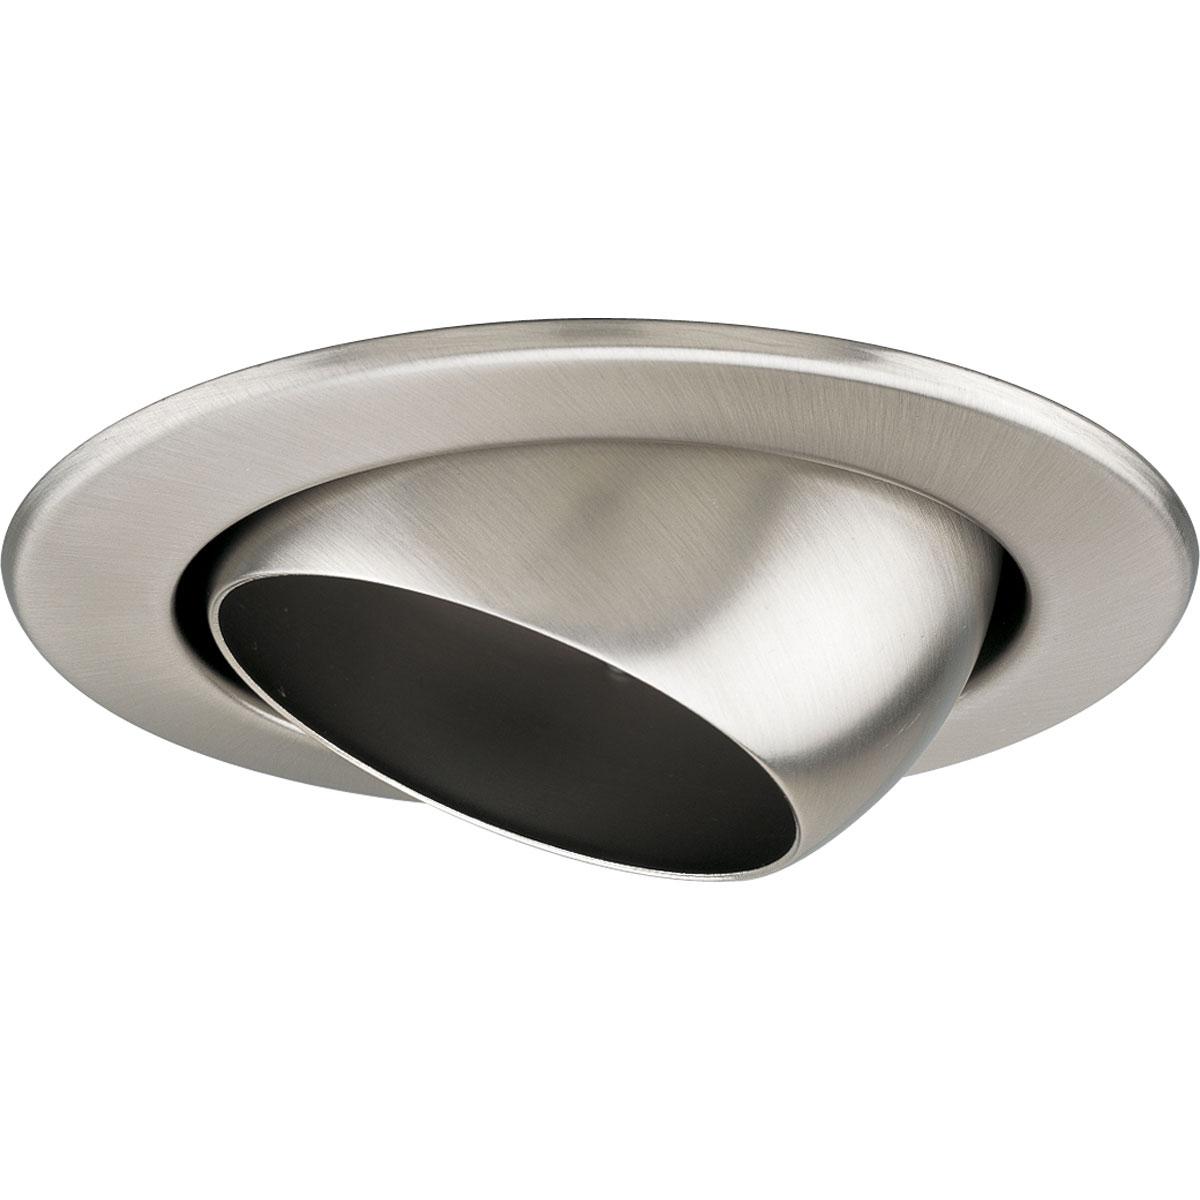 Hubbell P8046-09 4" Eyeball Trim in a Brushed Nickel finish with unpainted flanges to match the baffle finish. 360 positioning, tilt 20. 5" outside diameter.  ; Brushed Nickel finish. ; Matching flange. ; No light leaks around trim flange.